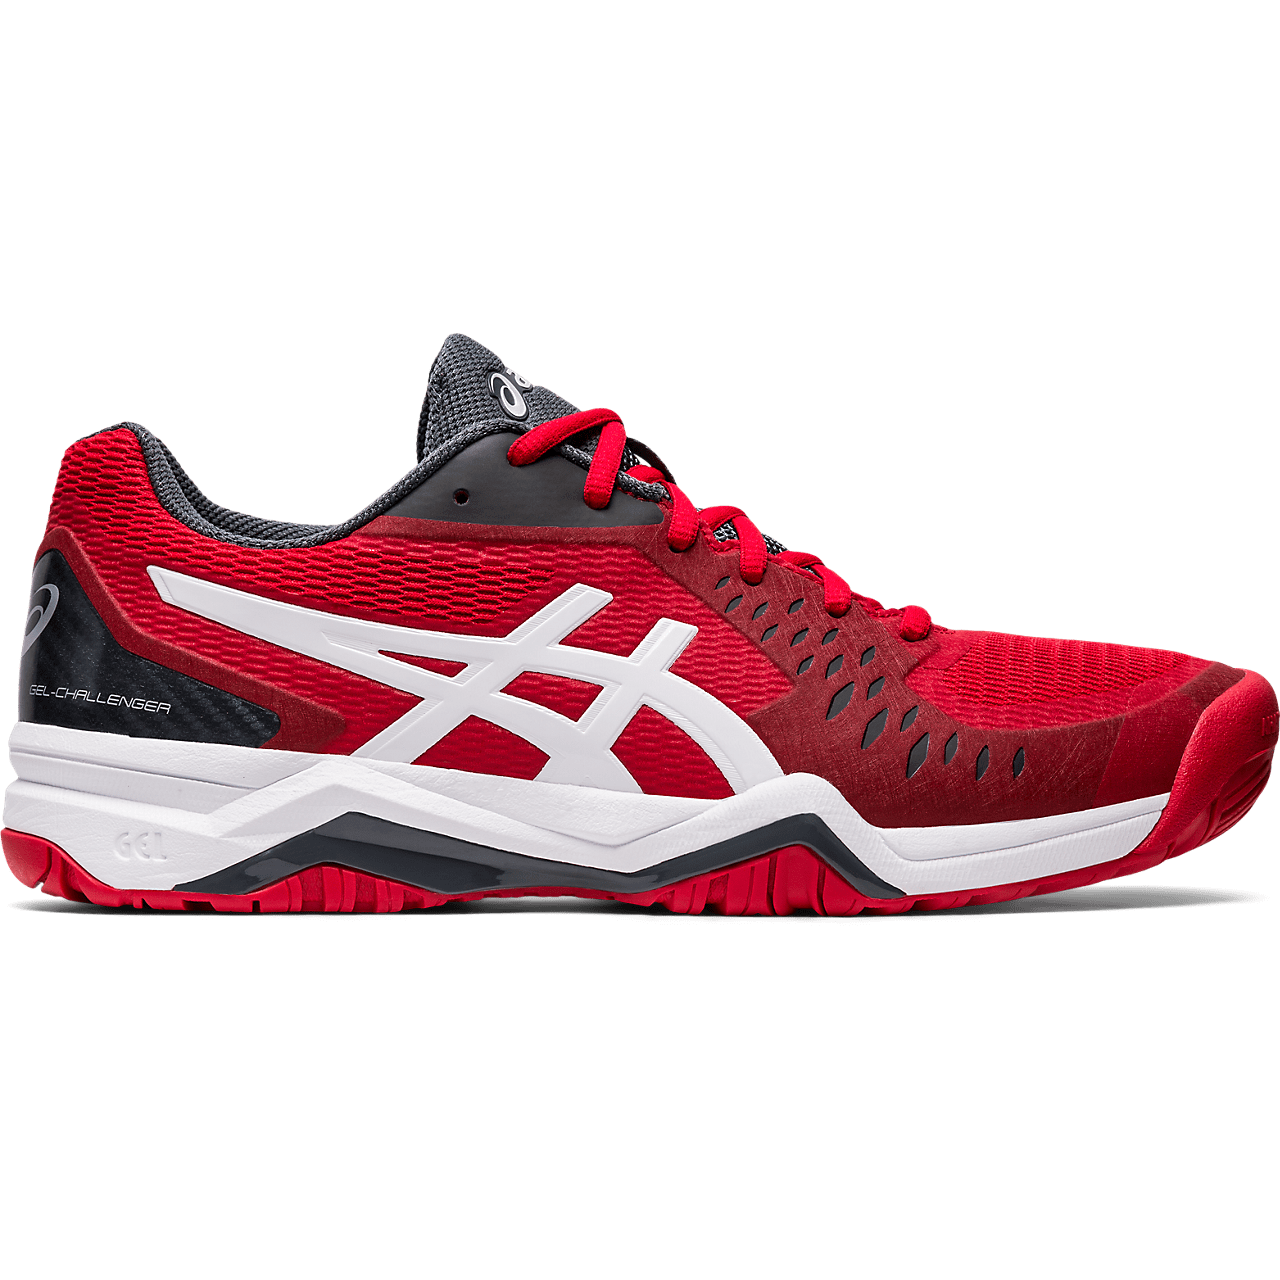 Asics Gel-Challenger 12 M 2020 (Classic Red/White) - 4Sport.ee